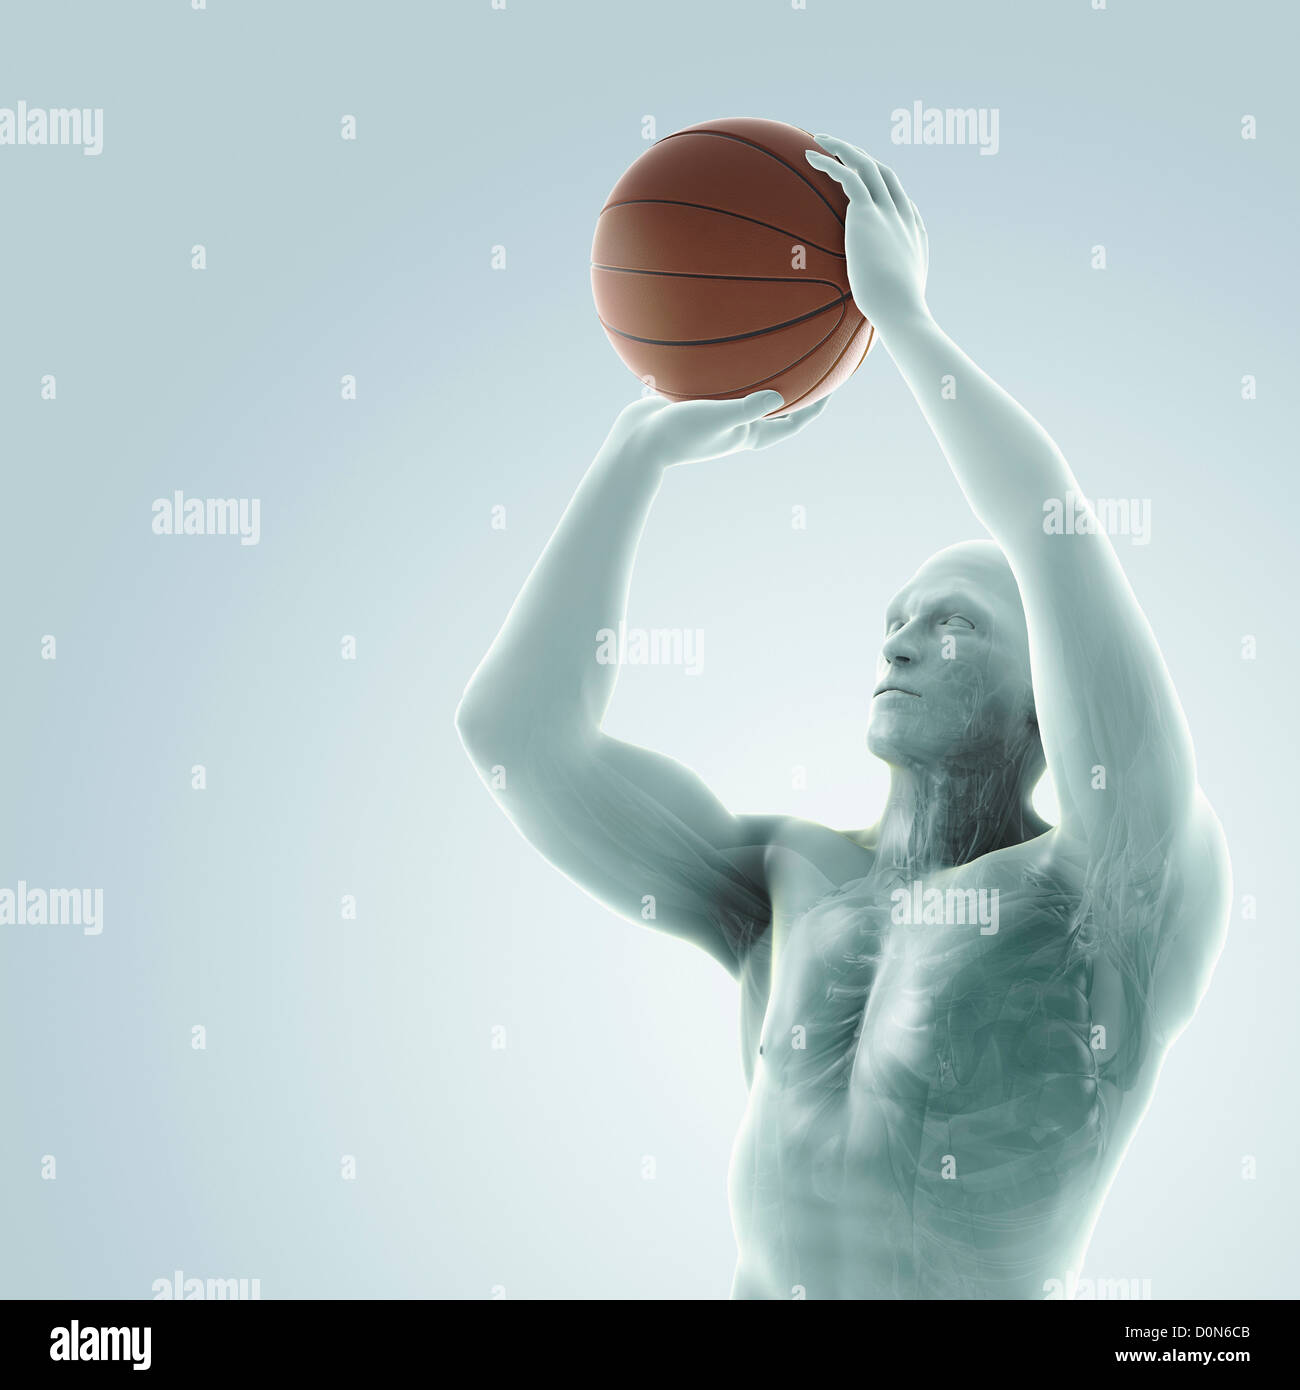 Male figure jumping with a basketball about to take a shot. The internal anatomy is visible within the body. Stock Photo